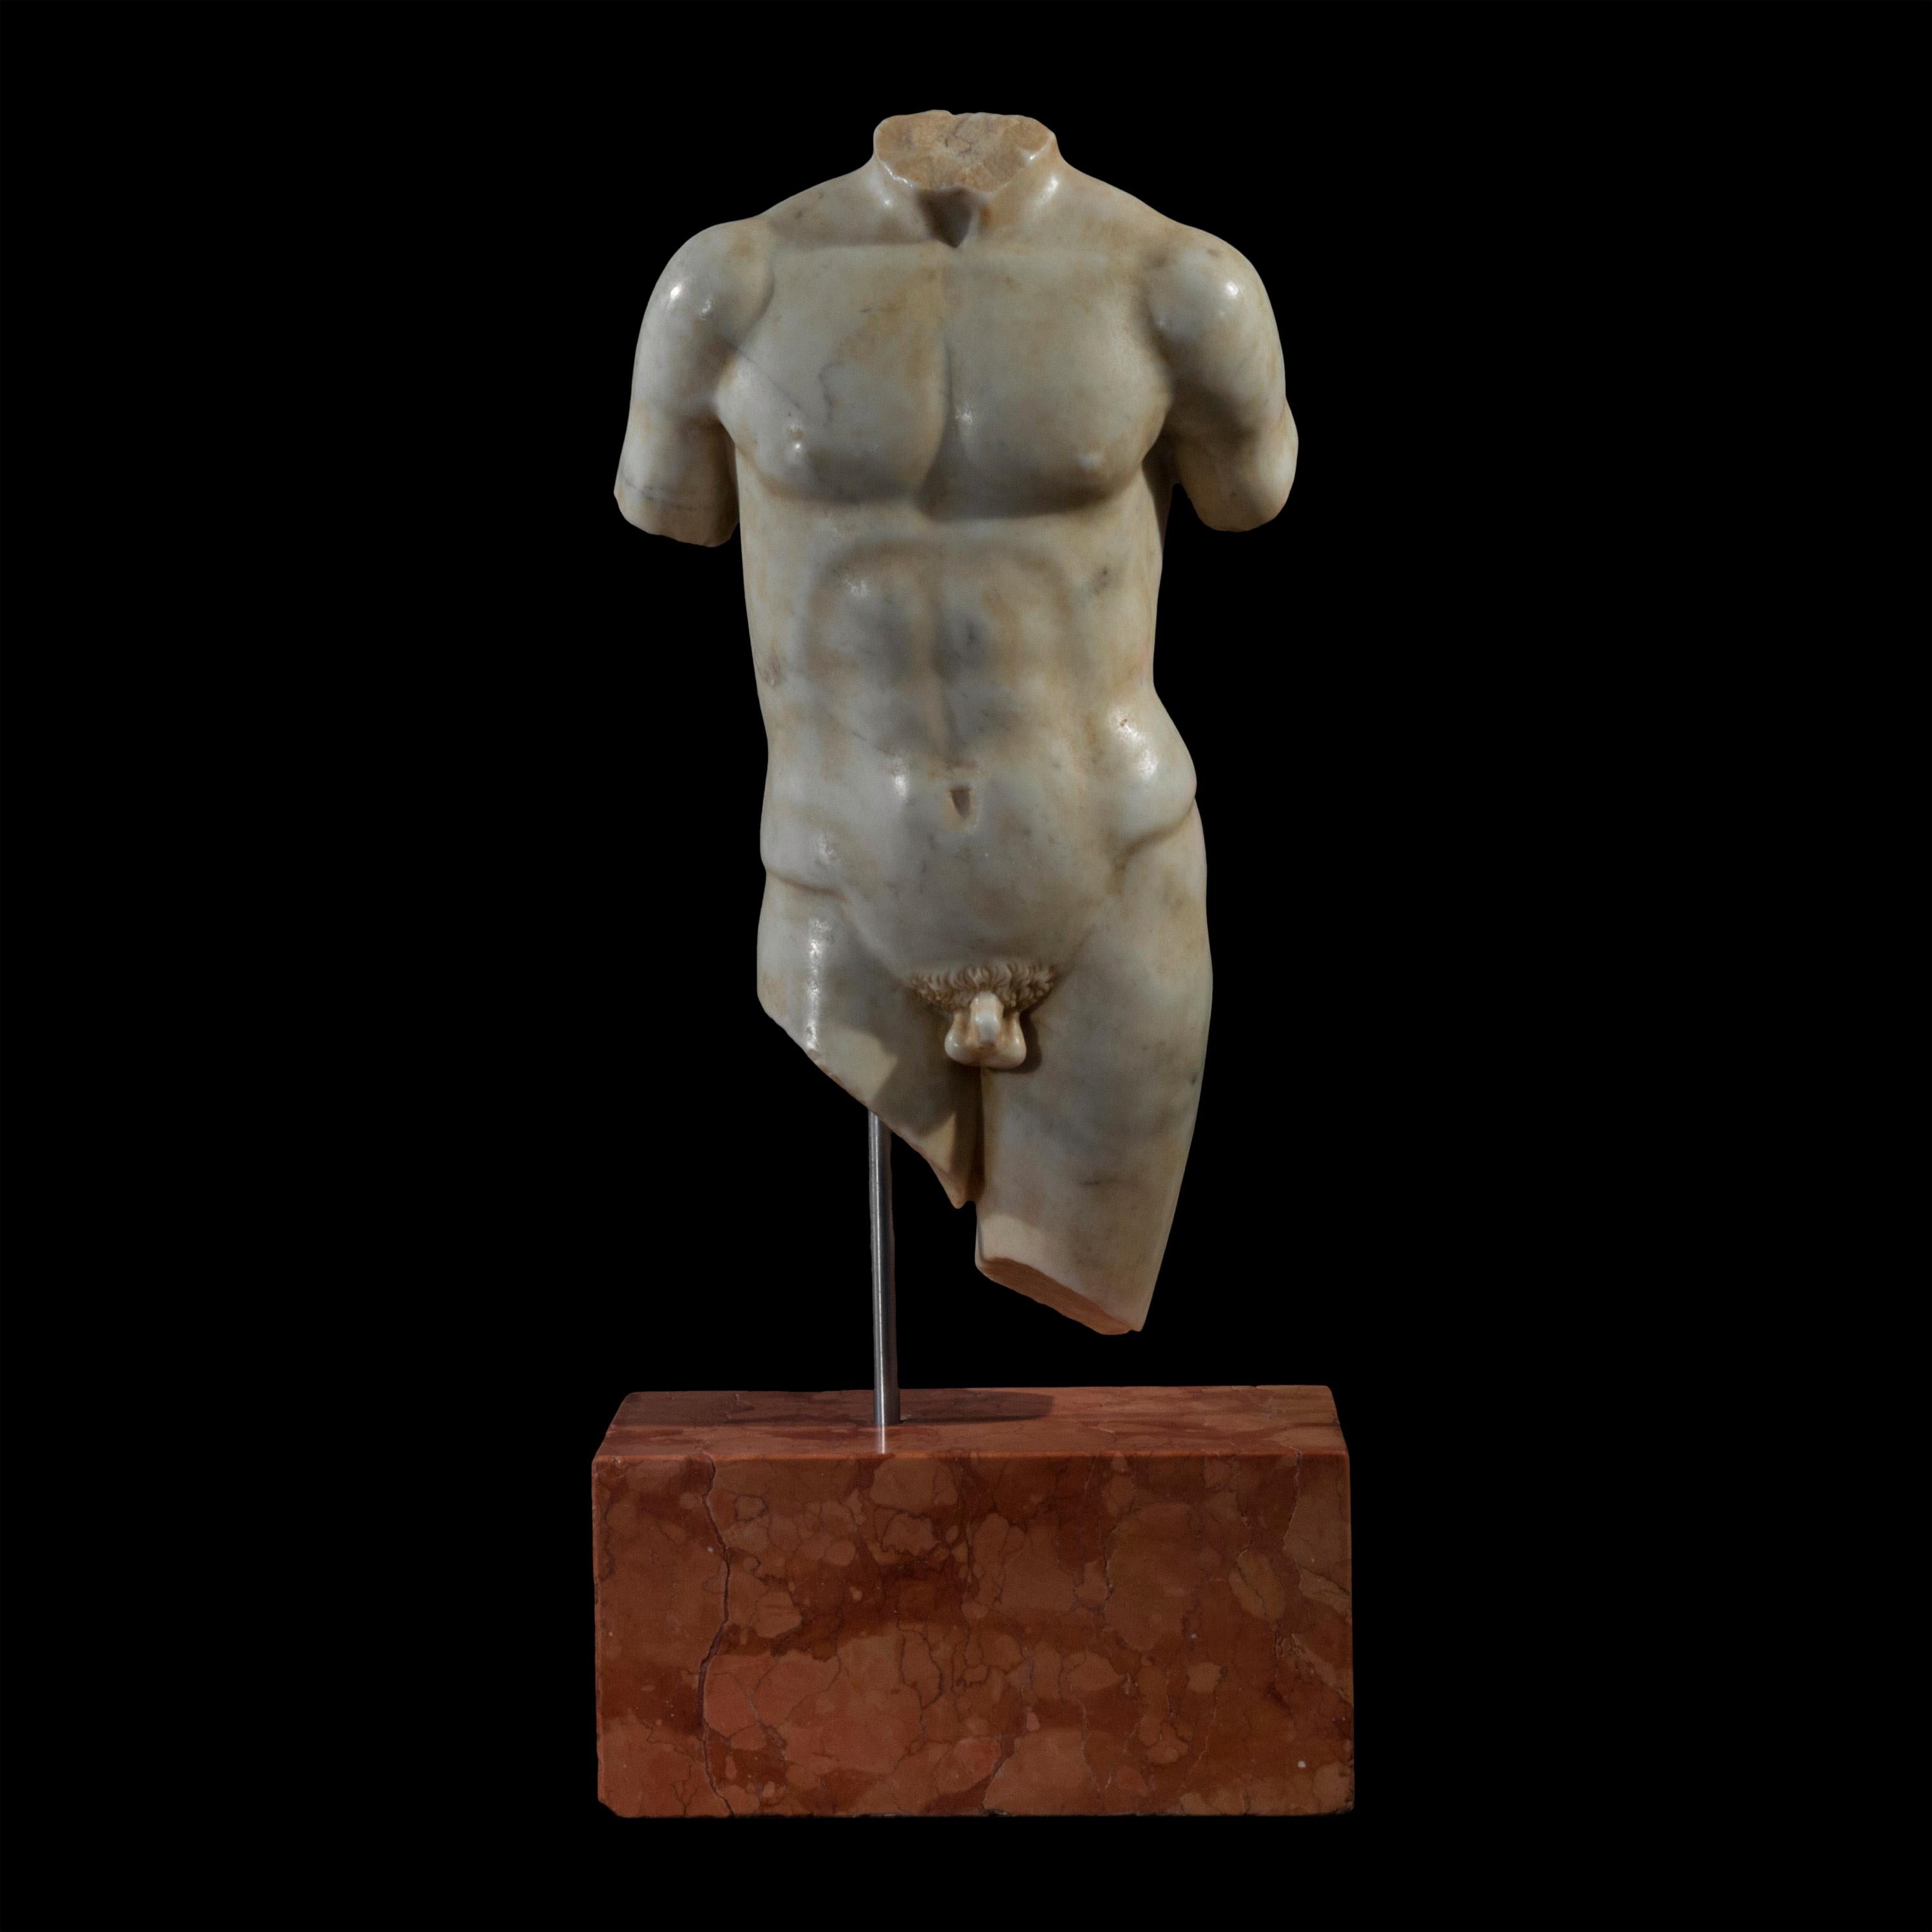 A delightfully detailed nude figure of a youthful athlete, finely sculpted Carrara marble in the ancient Greek or Roman style, mounted on a Rosso Verona base.
Italy, circa 1900.

Why we like it
The ultimate Grand Tour souvenir, this delightful